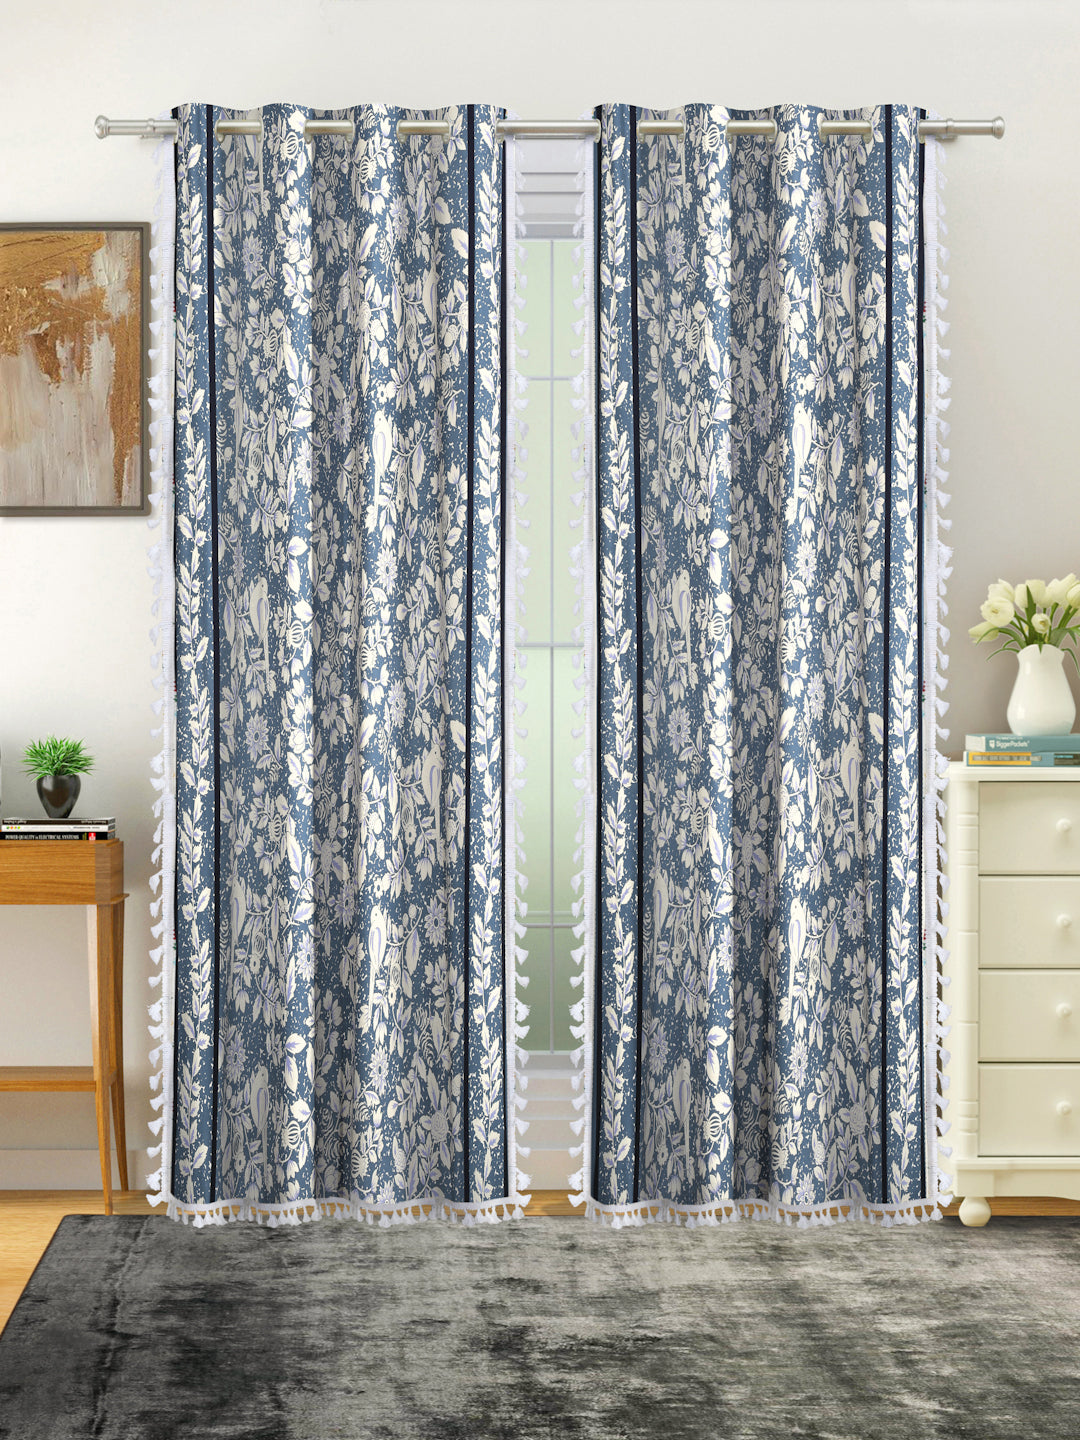 Cotton Printed Boho Light Filtering Long Door Curtain with Lace- Navy Blue (Pack of 2)